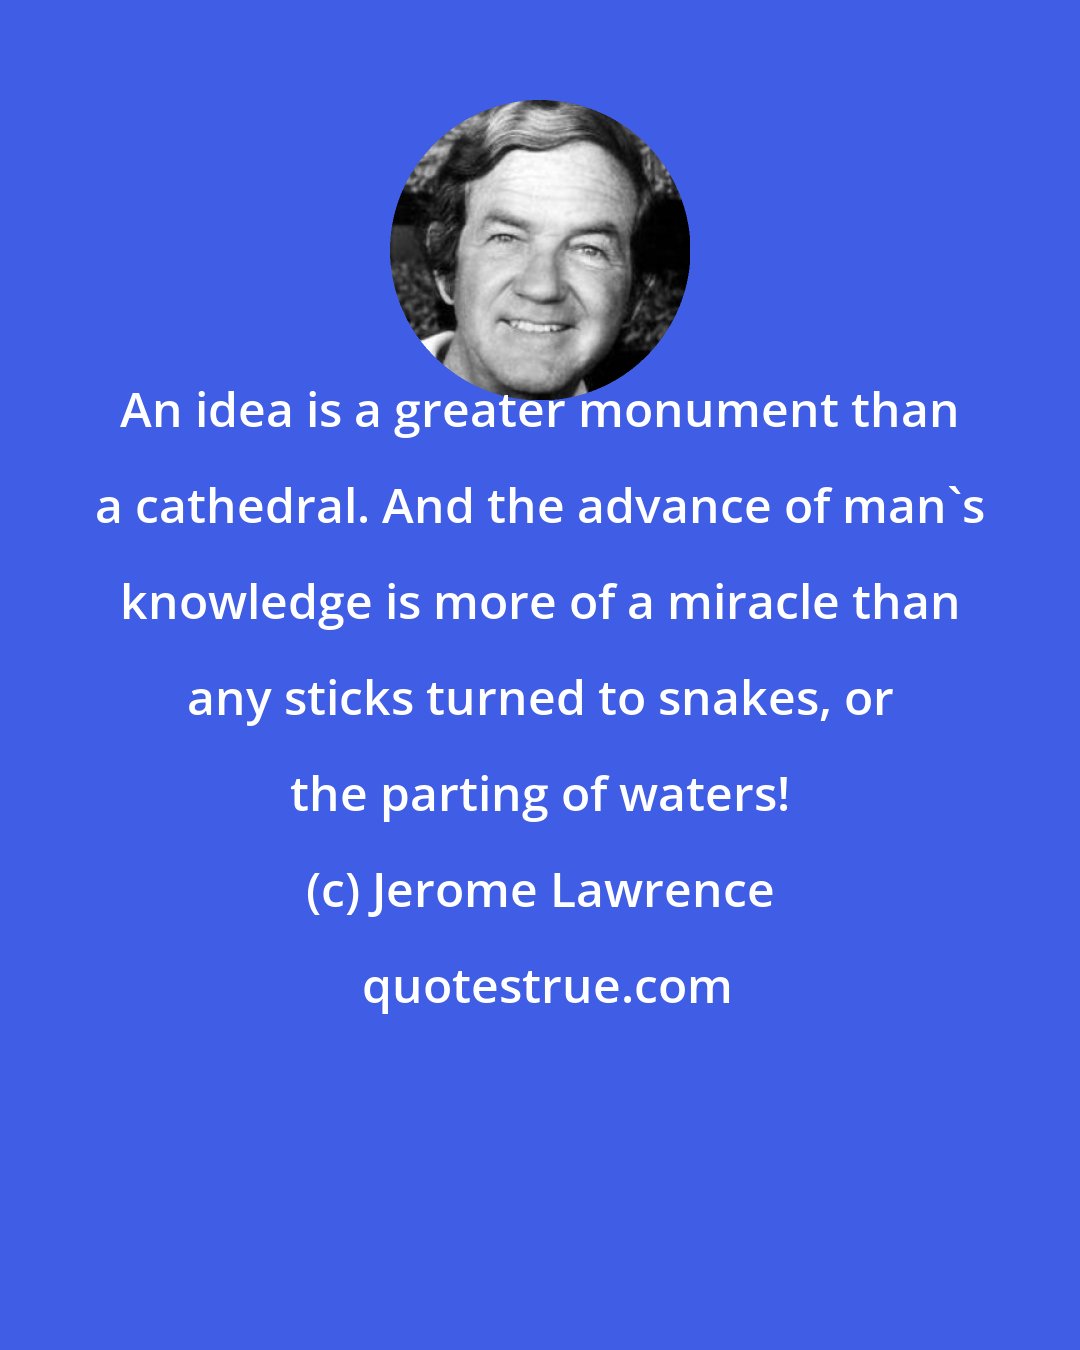 Jerome Lawrence: An idea is a greater monument than a cathedral. And the advance of man's knowledge is more of a miracle than any sticks turned to snakes, or the parting of waters!